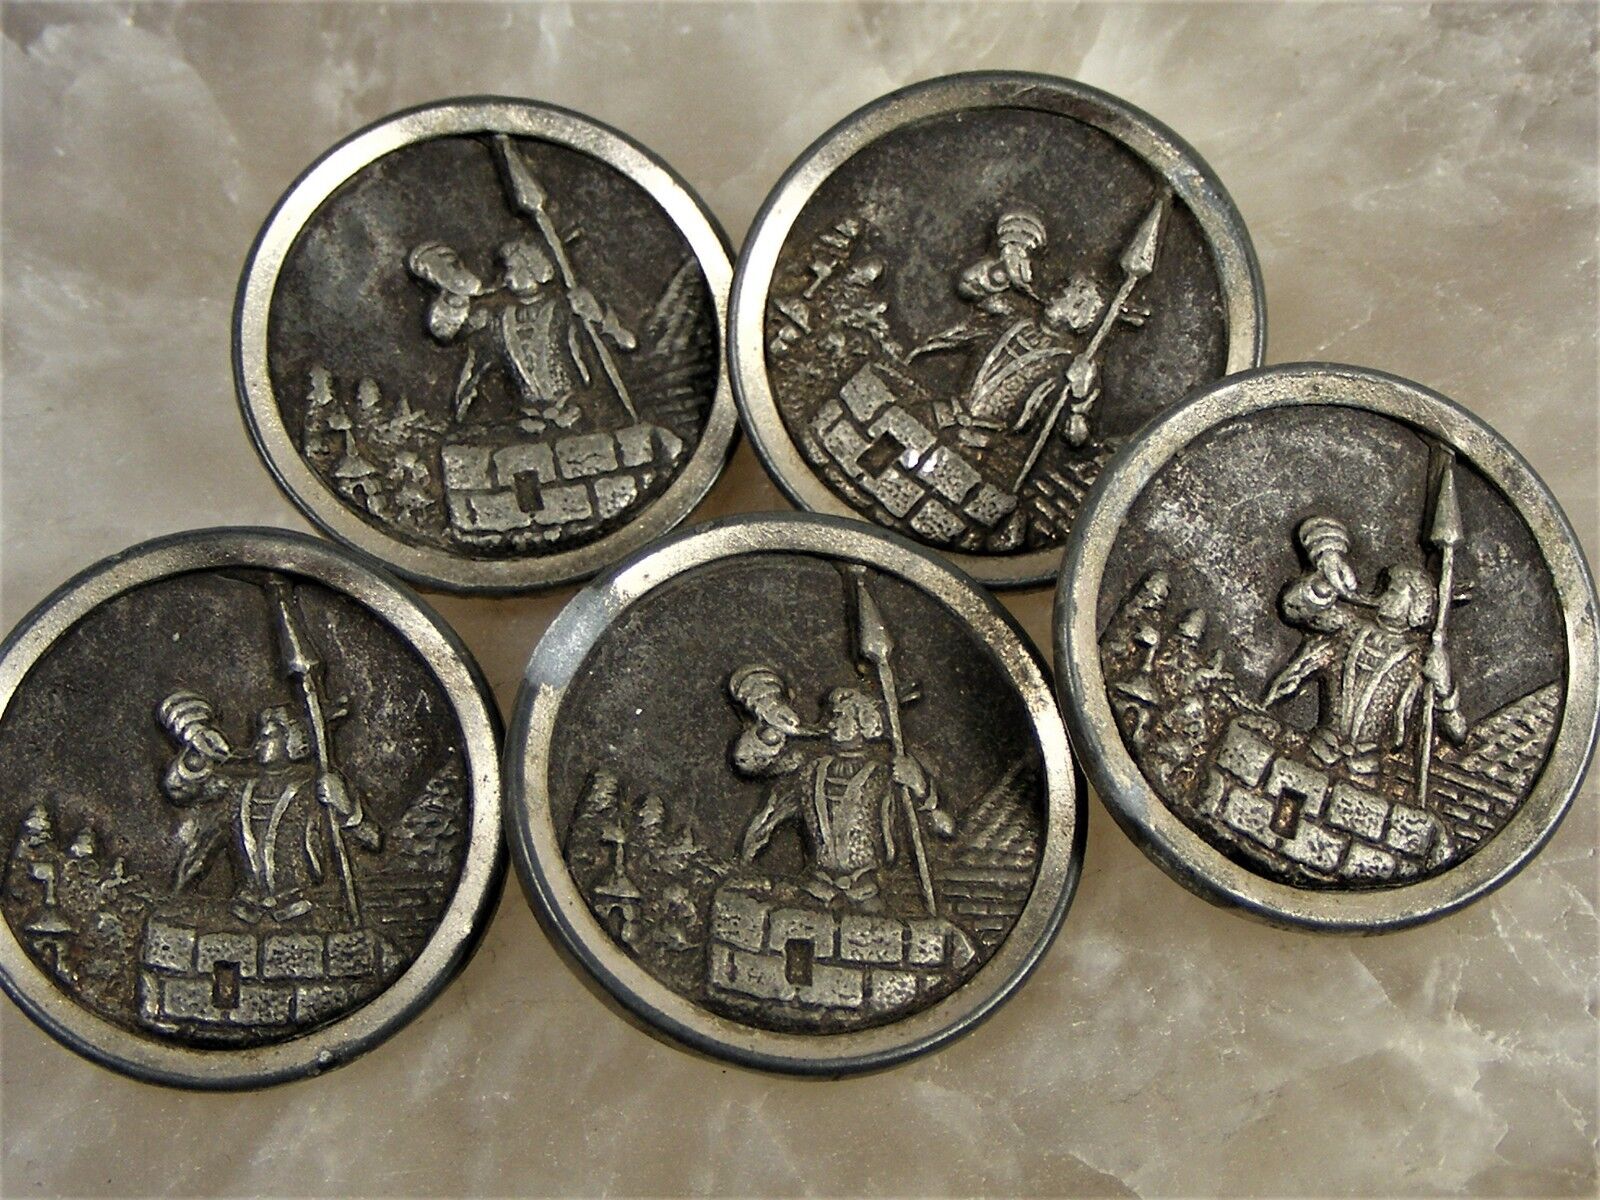 Antique Brass & Pewter Coat Story Book BUTTON Lot o 5 Soldier Castle Wall Spear  Без бренда - фотография #2